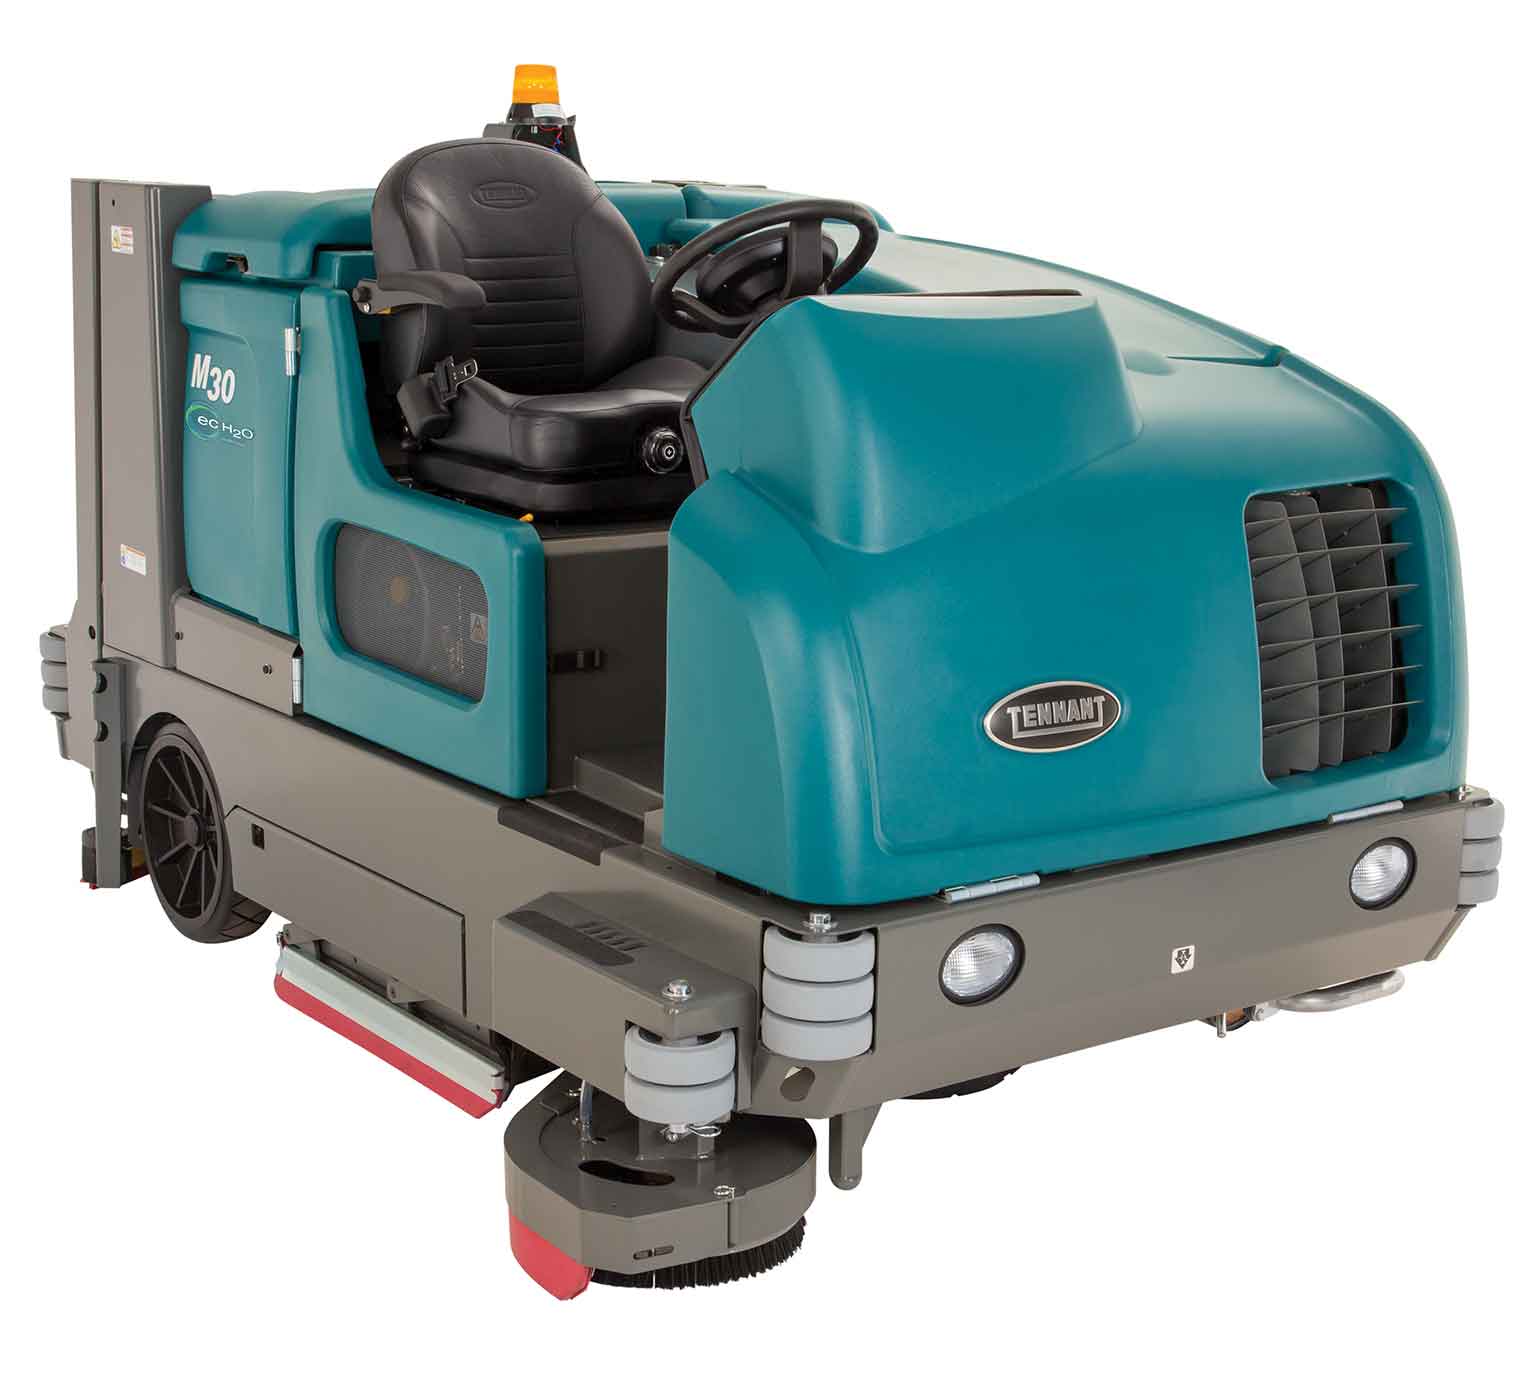 Tennant M30 Large Integrated Ride-on Sweeper-Scrubber